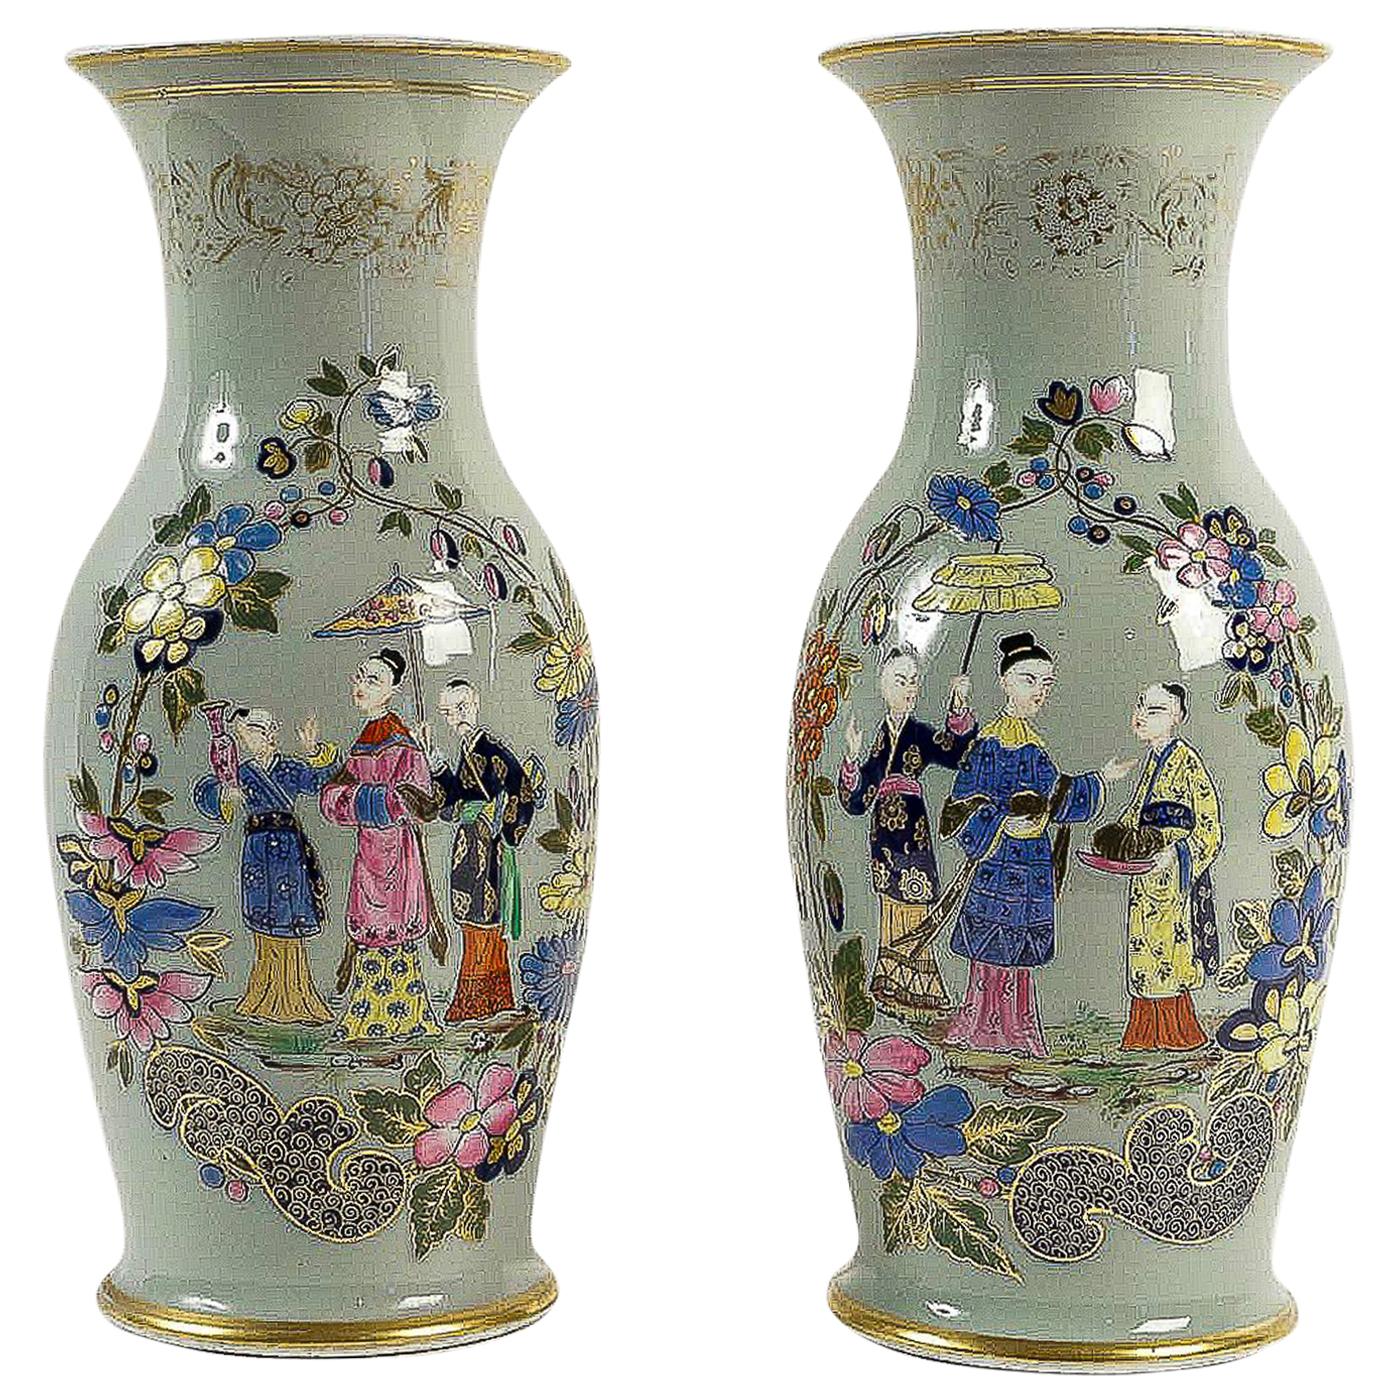 Bayeux, French 19th Century, Polychrome Celadon Family Pair of Vases, circa 1850